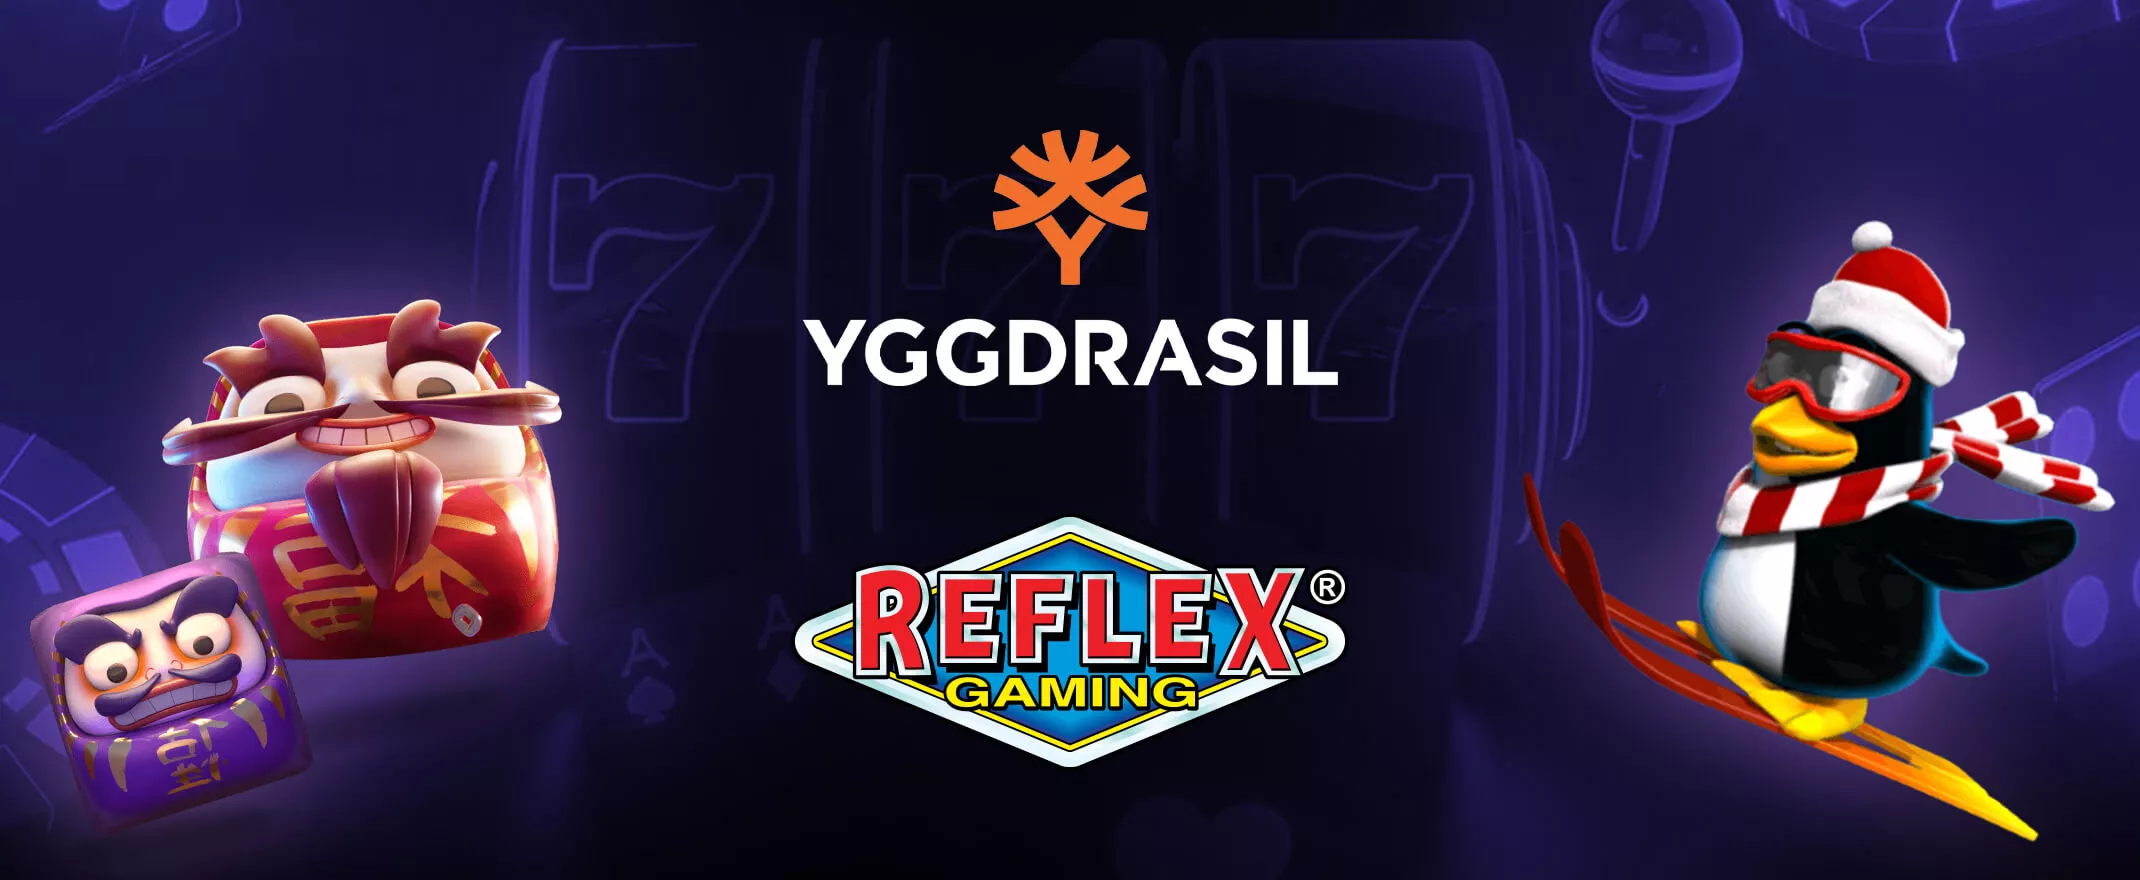 Yggdrasil Signs Land-Based Agreement With Reflex Gaming